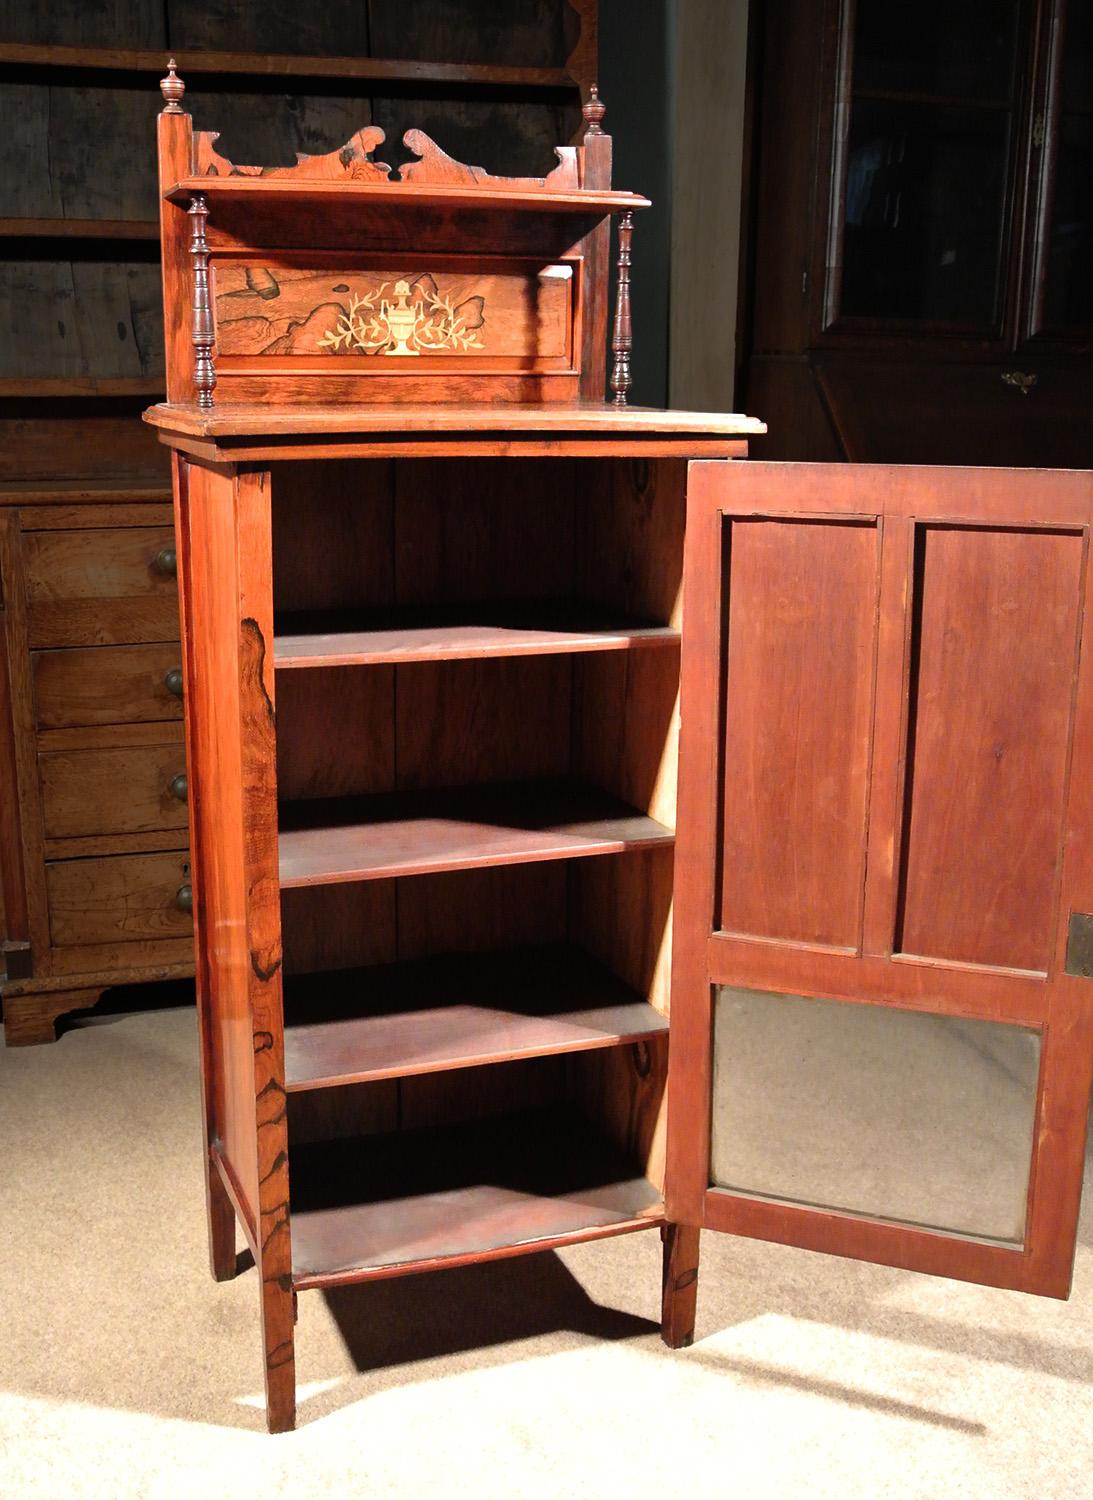 A fine quality and very attractive music cabinet in rosewood with original shelving and glass panel.

Very sturdy with no damage or repairs, the door opens smoothly and closes properly with a working key to reveal original shelves.

With the